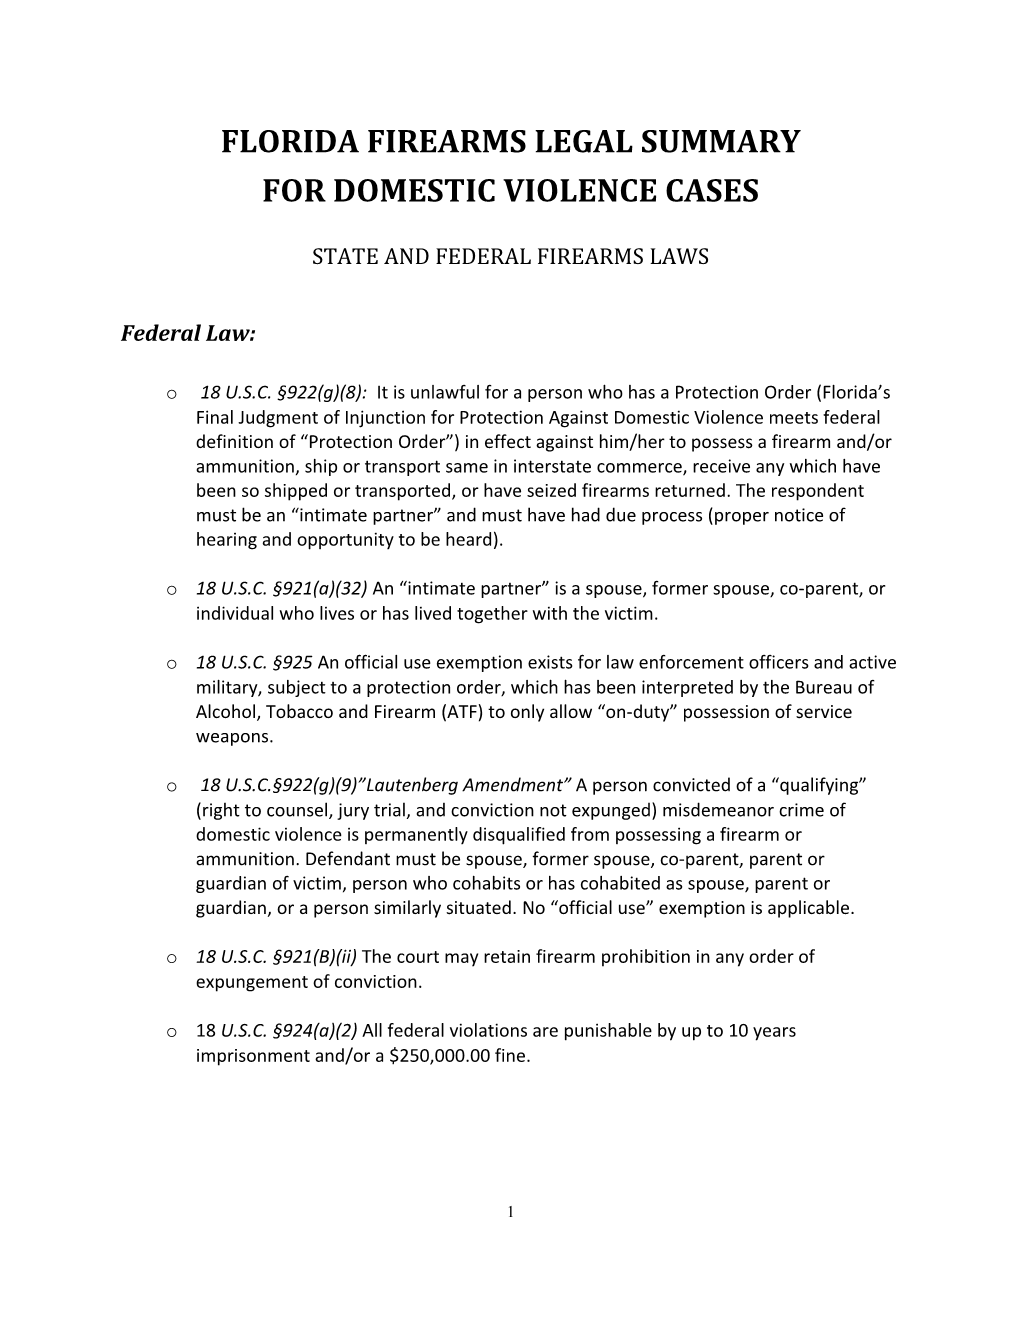 Florida Firearms Legal Summary for Domestic Violence Cases